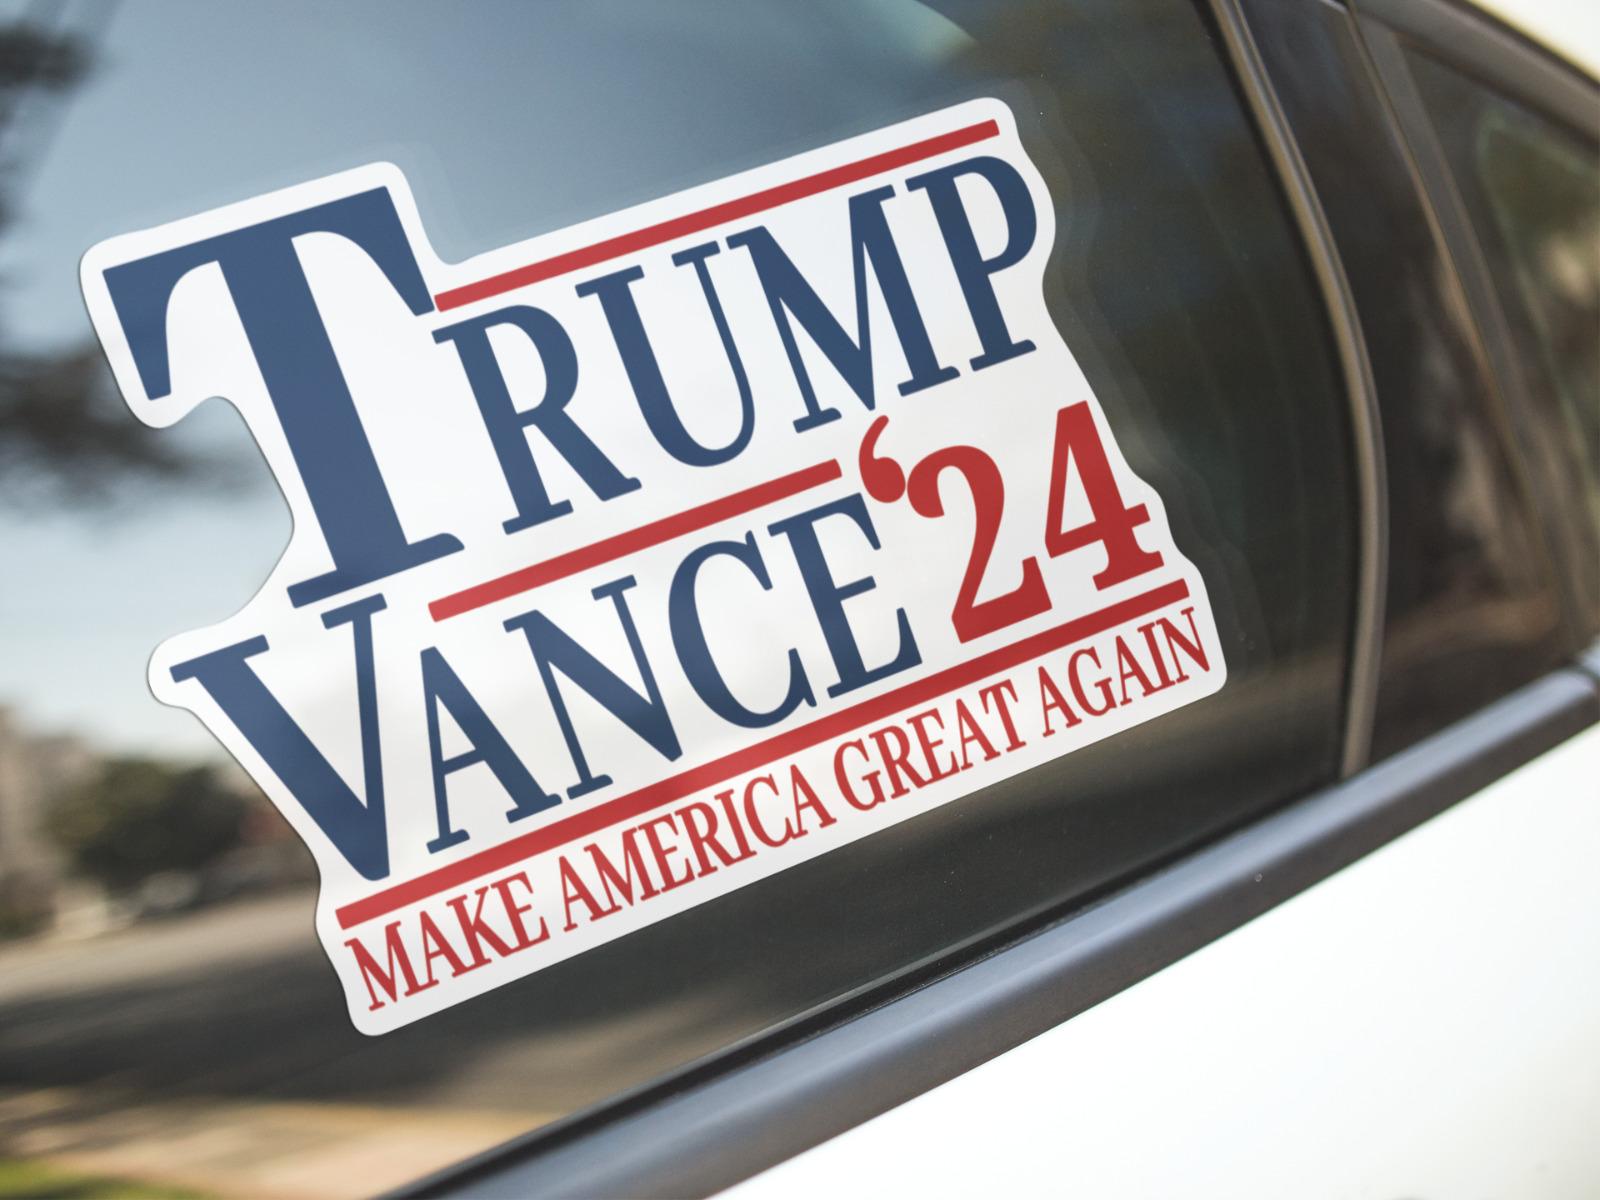 TRUMP VANCE 2024 STICKERS 2 PACK 5.5-INCH BY 3.4-IN MAGA AMERICA PRESIDENT USA